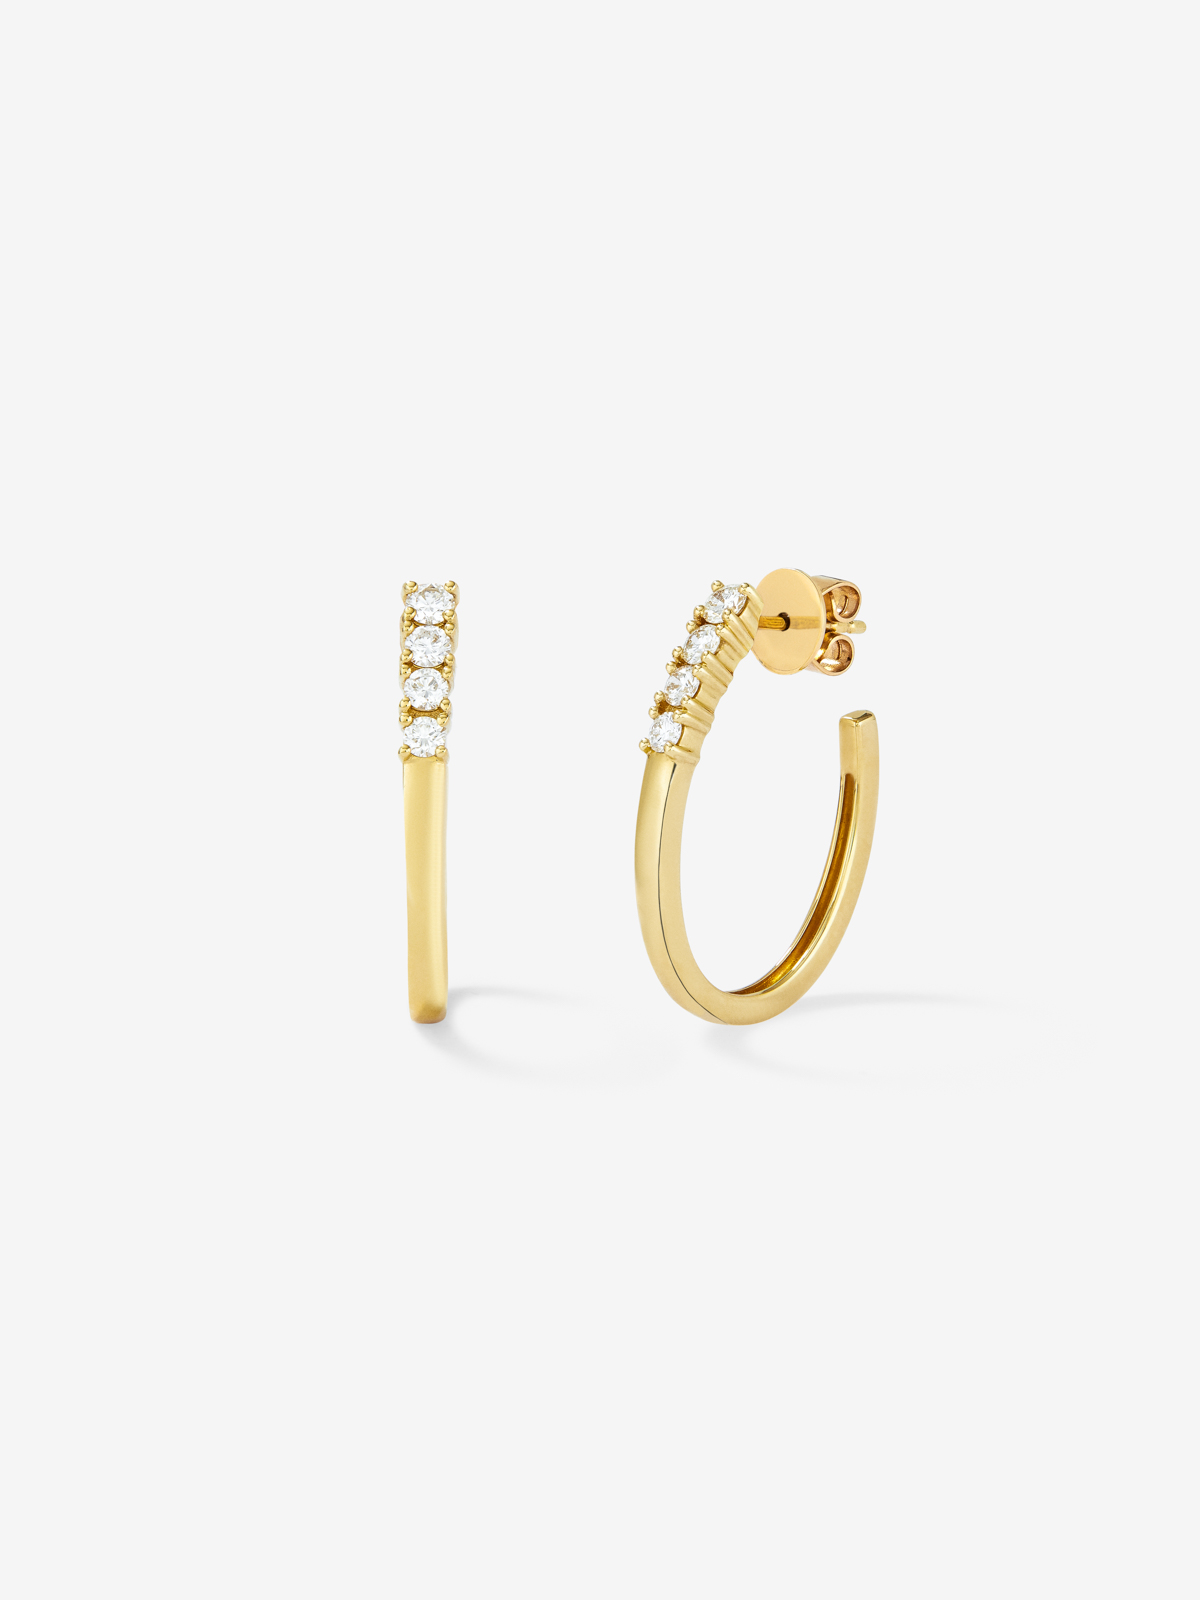 18k yellow gold ring earrings with white 0.5 cts bright diamonds